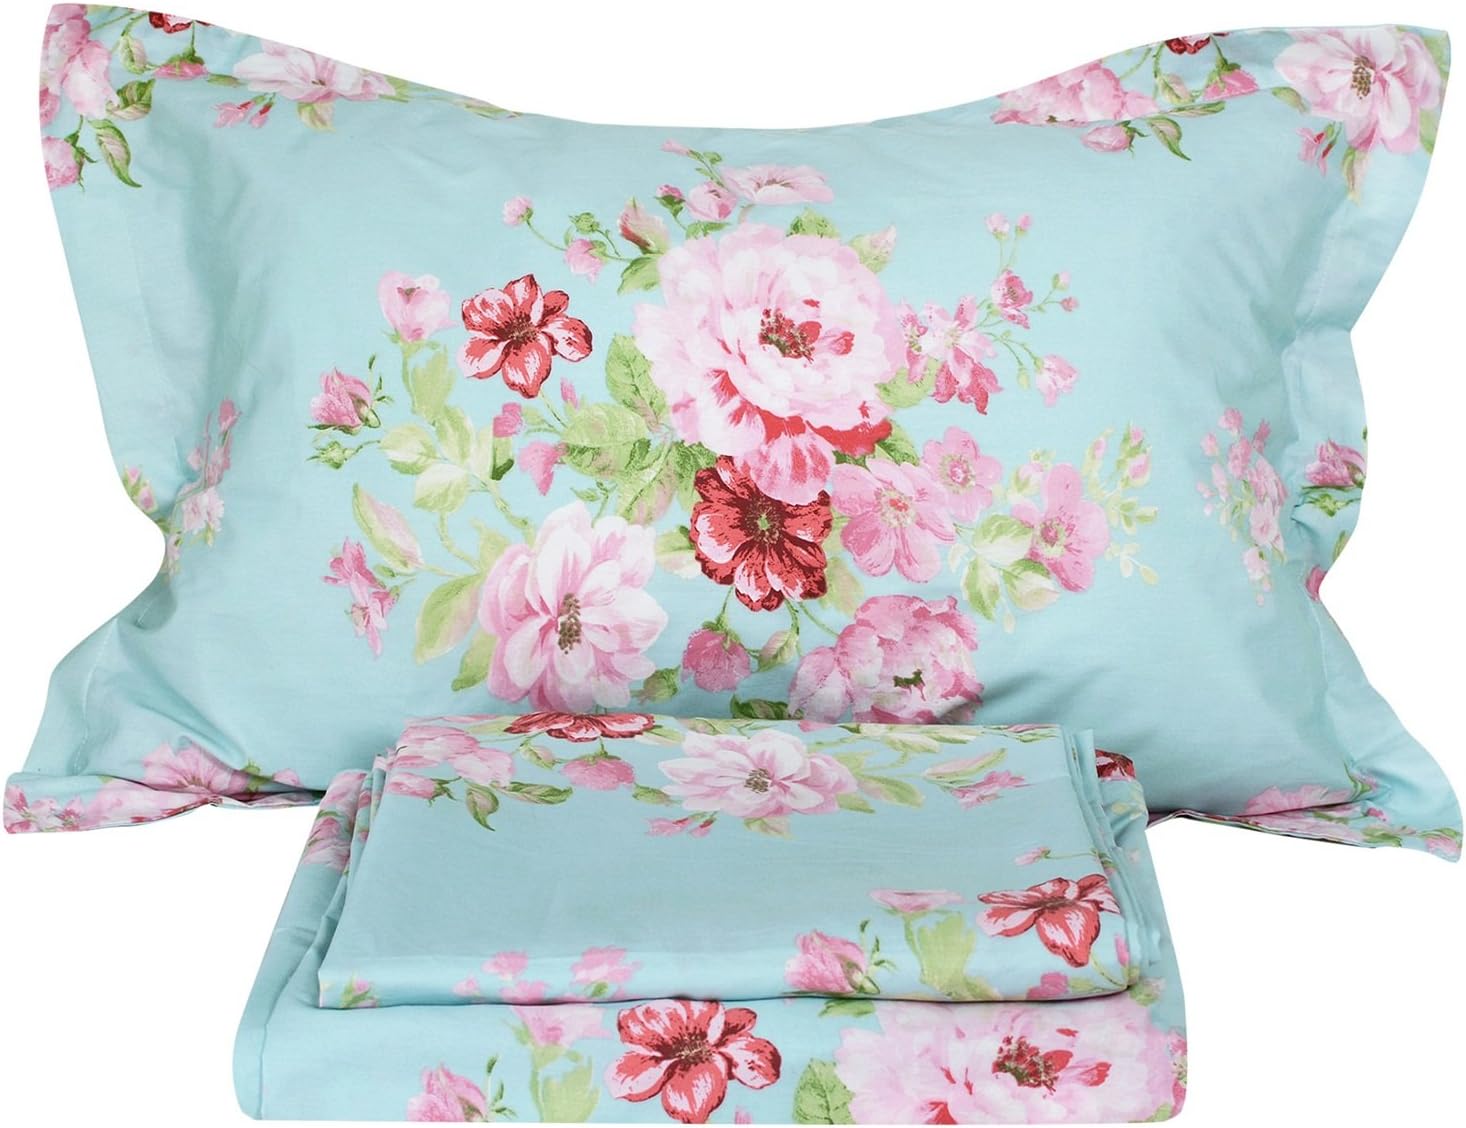 FADFAY Shabby Pink Floral 4 Piece Bed Sheet Set 100% Cotton Deep Pocket-Queen